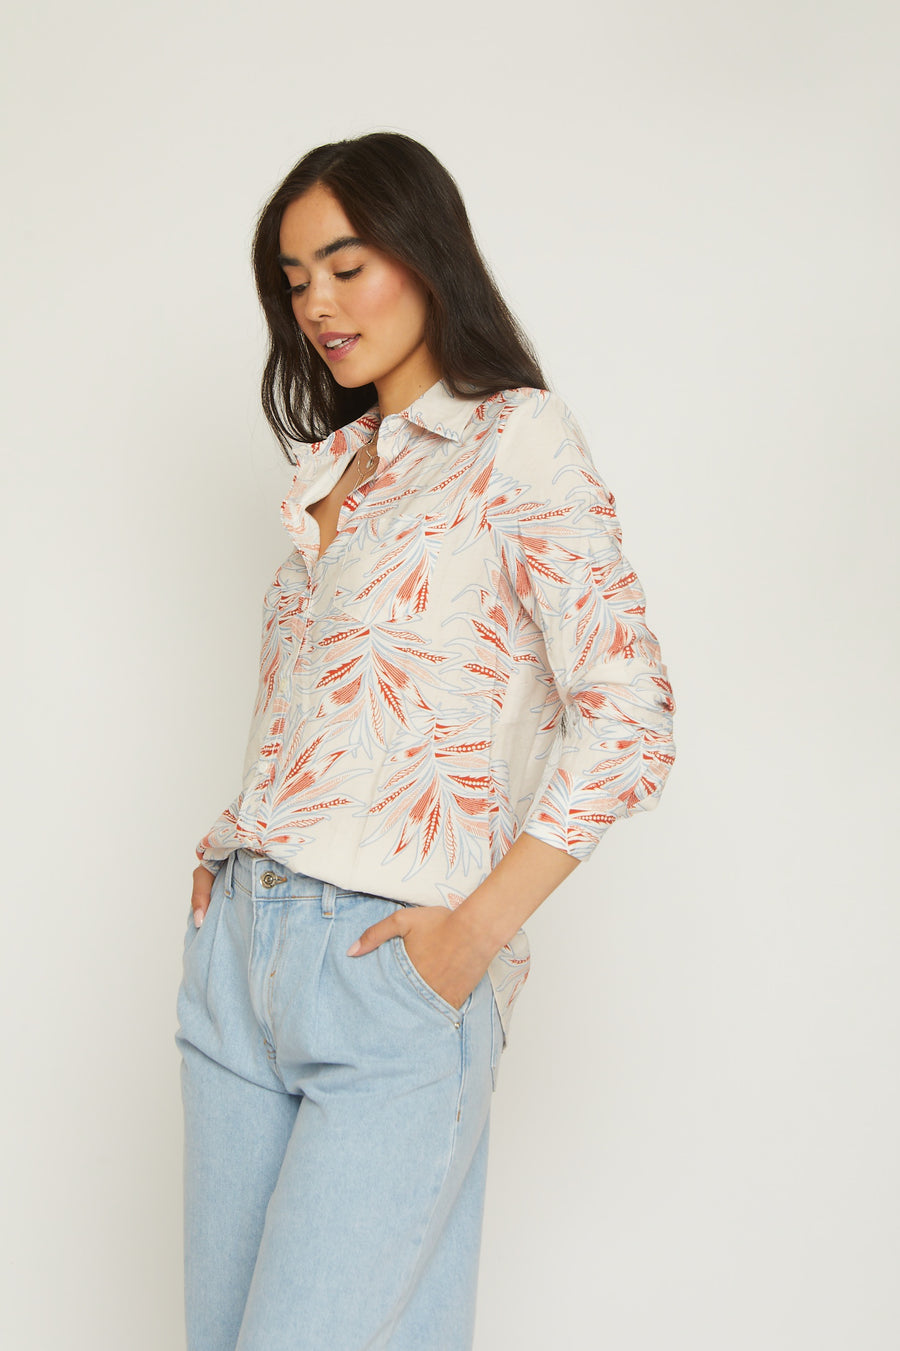 No Srcipt image - Images of 1 of 6 Floral Printed Spring Long Sleeve Button Down White with Red and Blue Floral Design